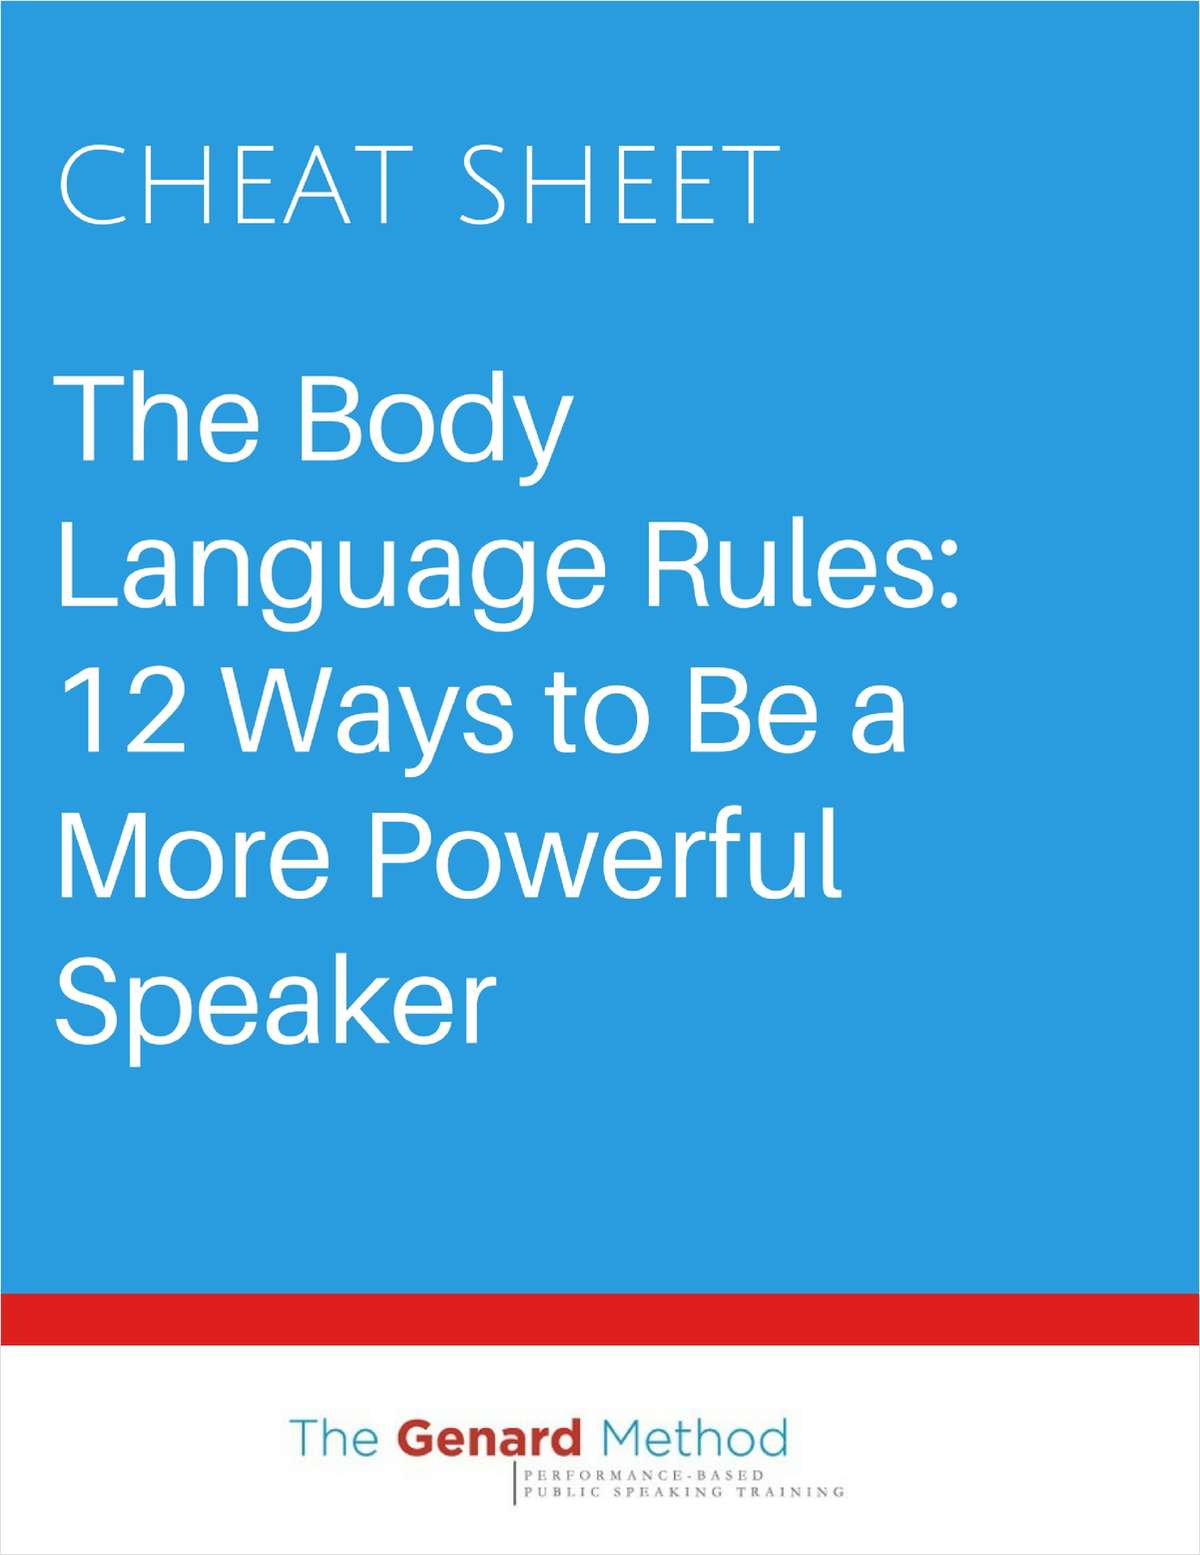 The Body Language Rules: 12 Ways to Be a More Powerful Speaker